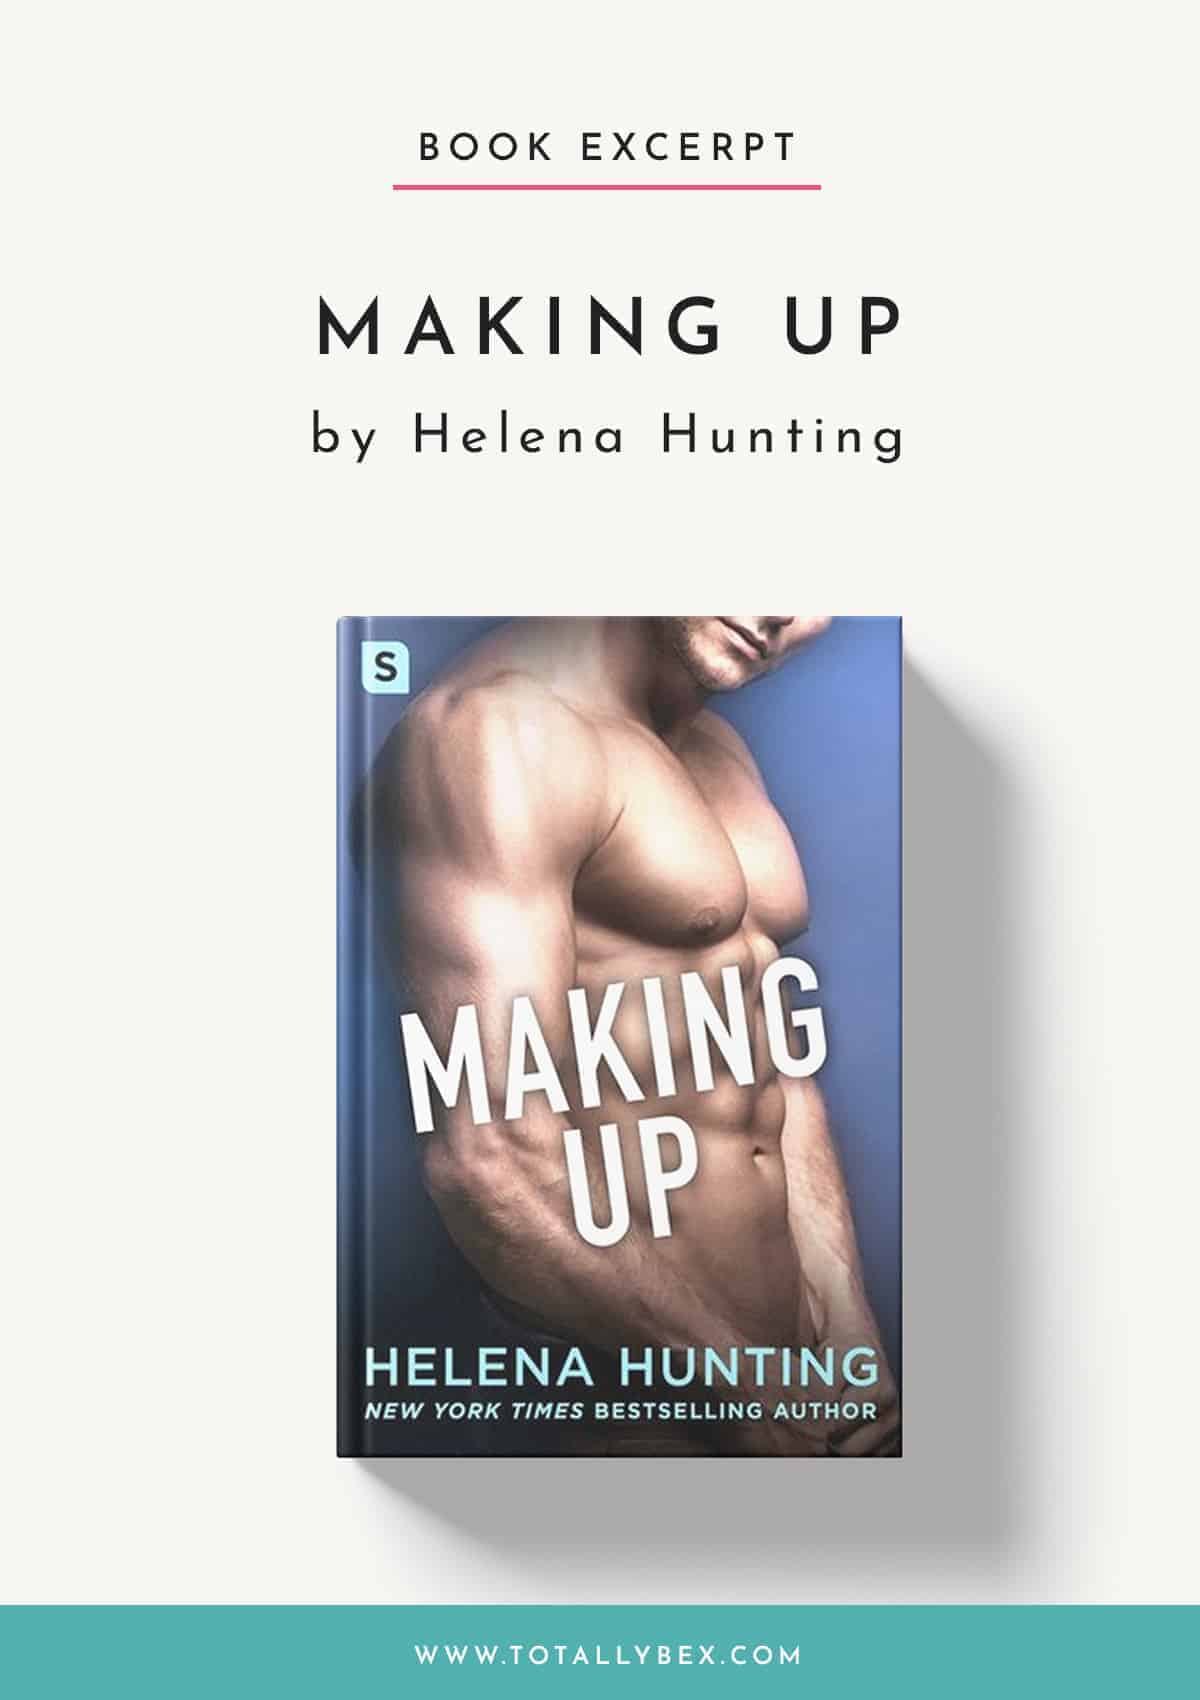 Read Chapter 1 of Making Up by Helena Hunting!